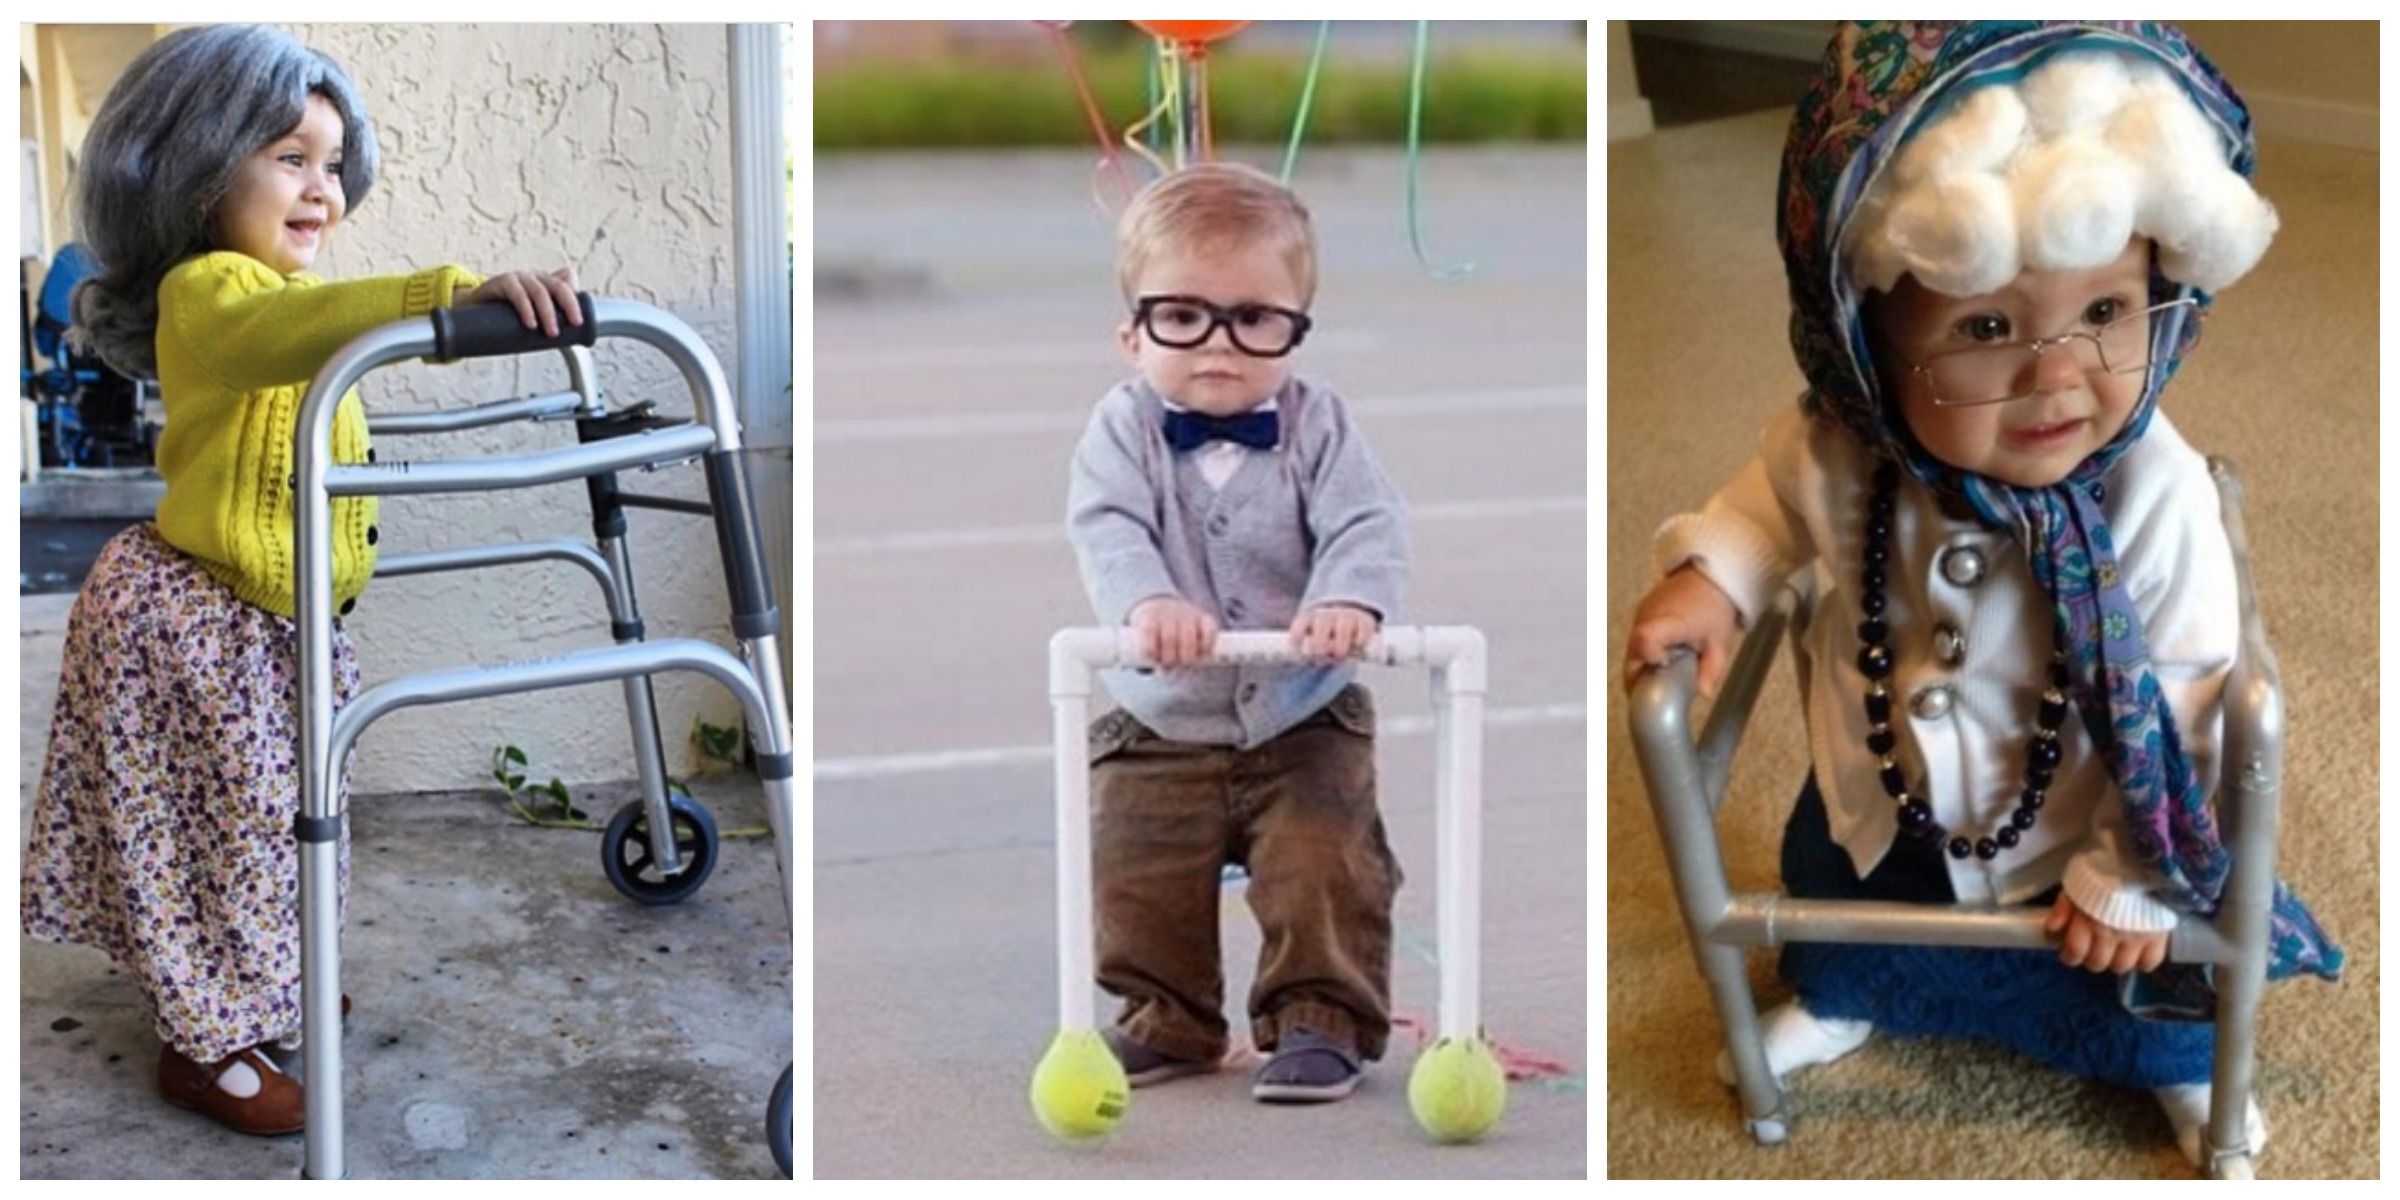 old people baby costume